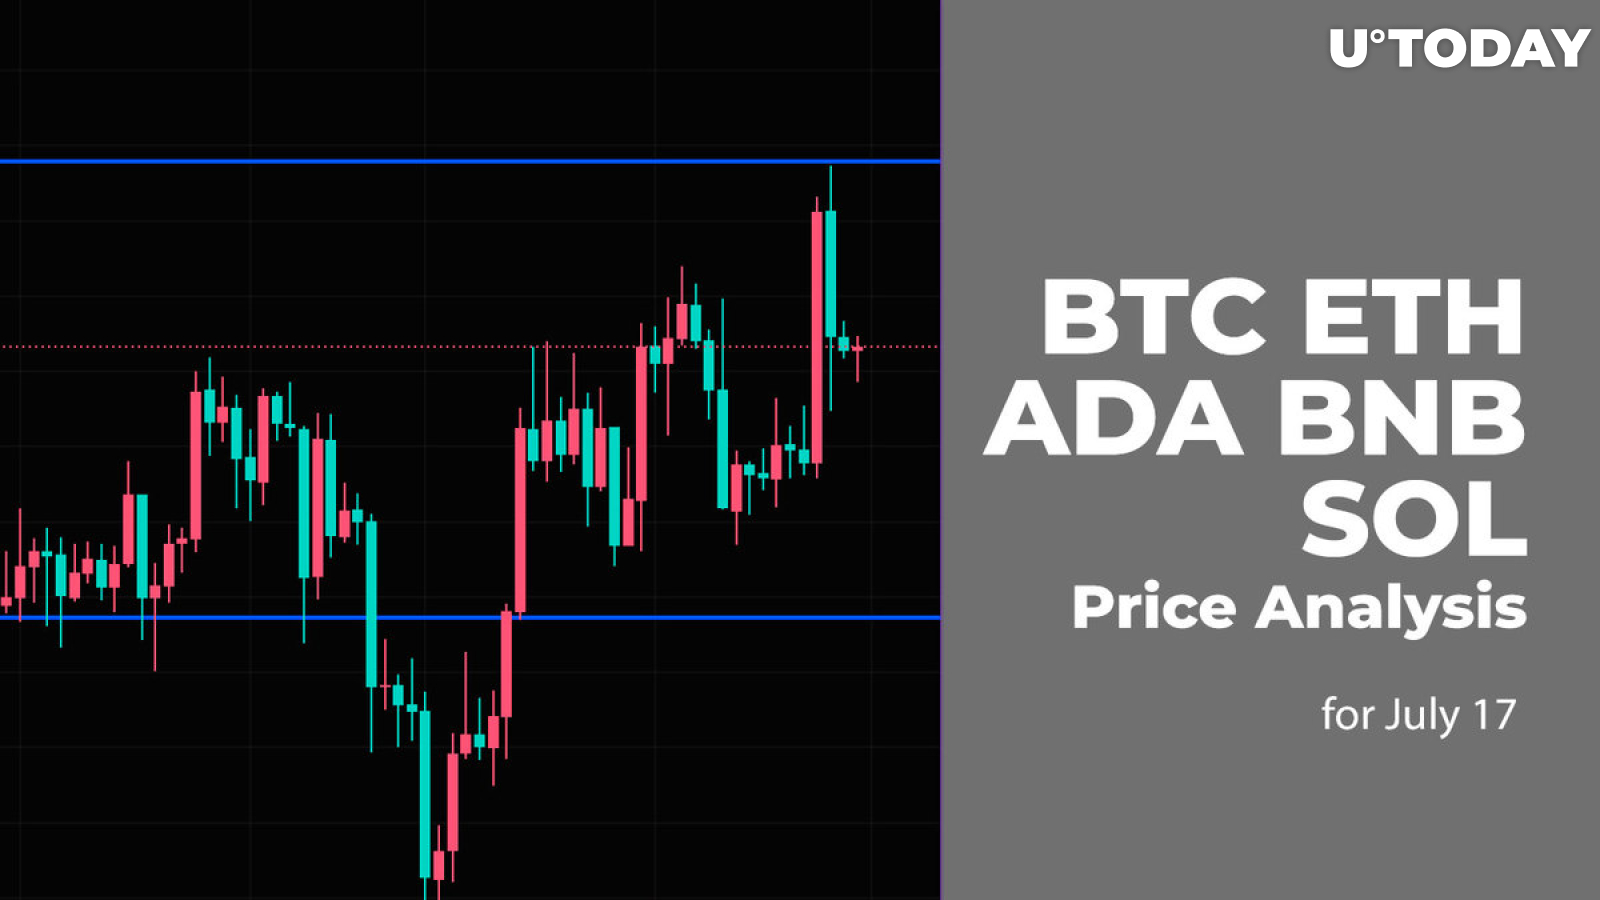 BTC, ETH, ADA, BNB and SOL Price Analysis for July 17